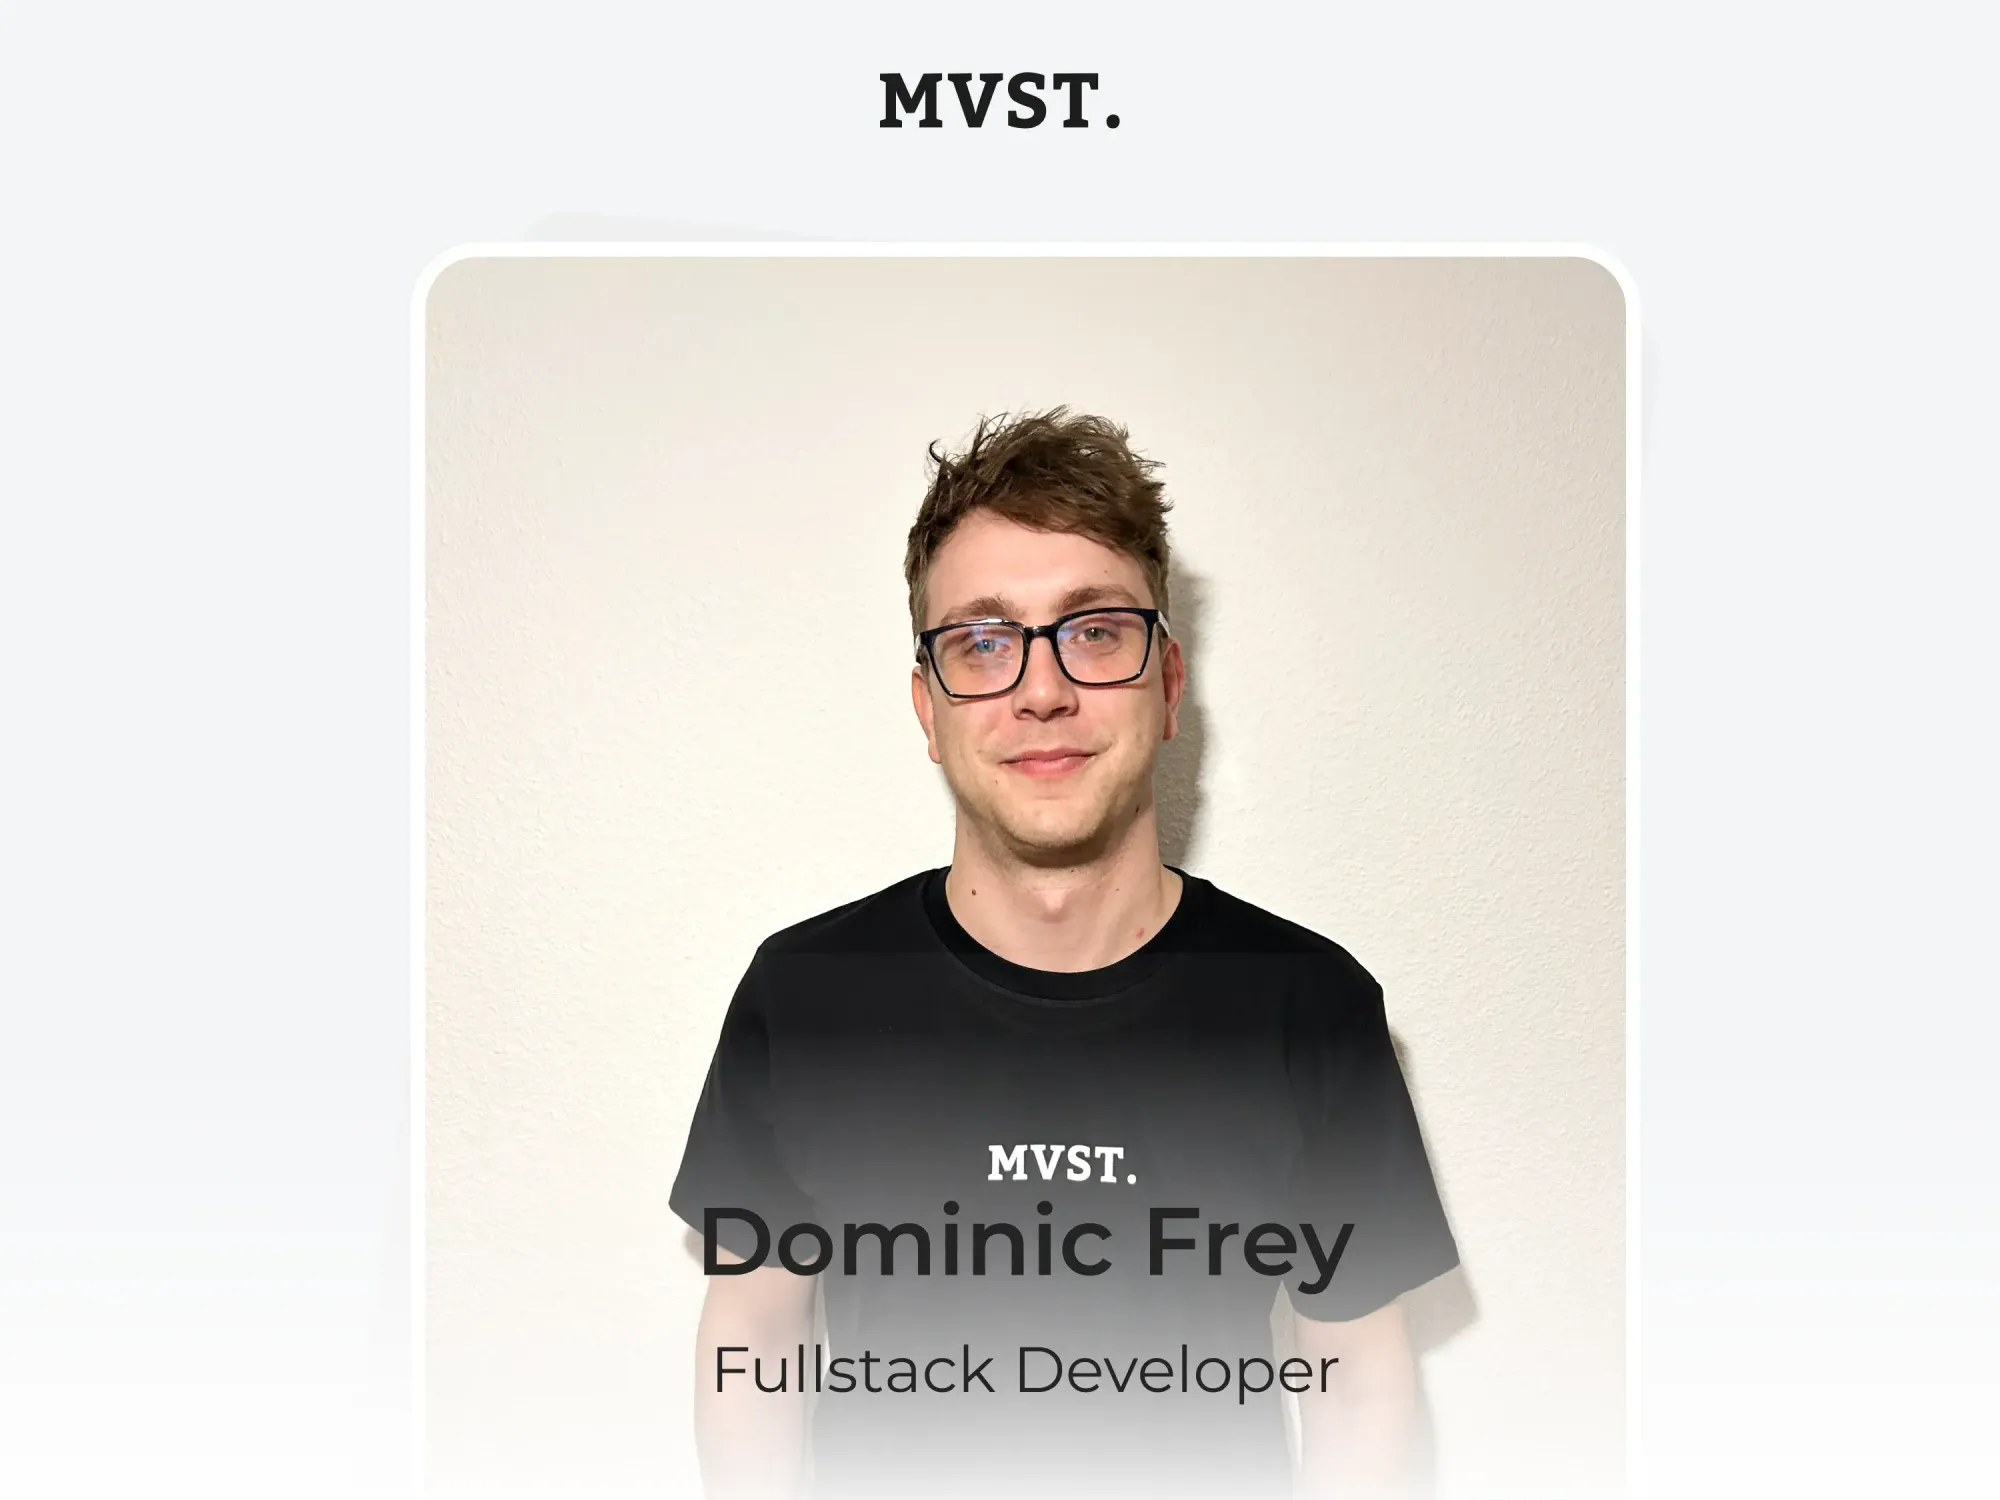 Welcome to MVST, Dominic!